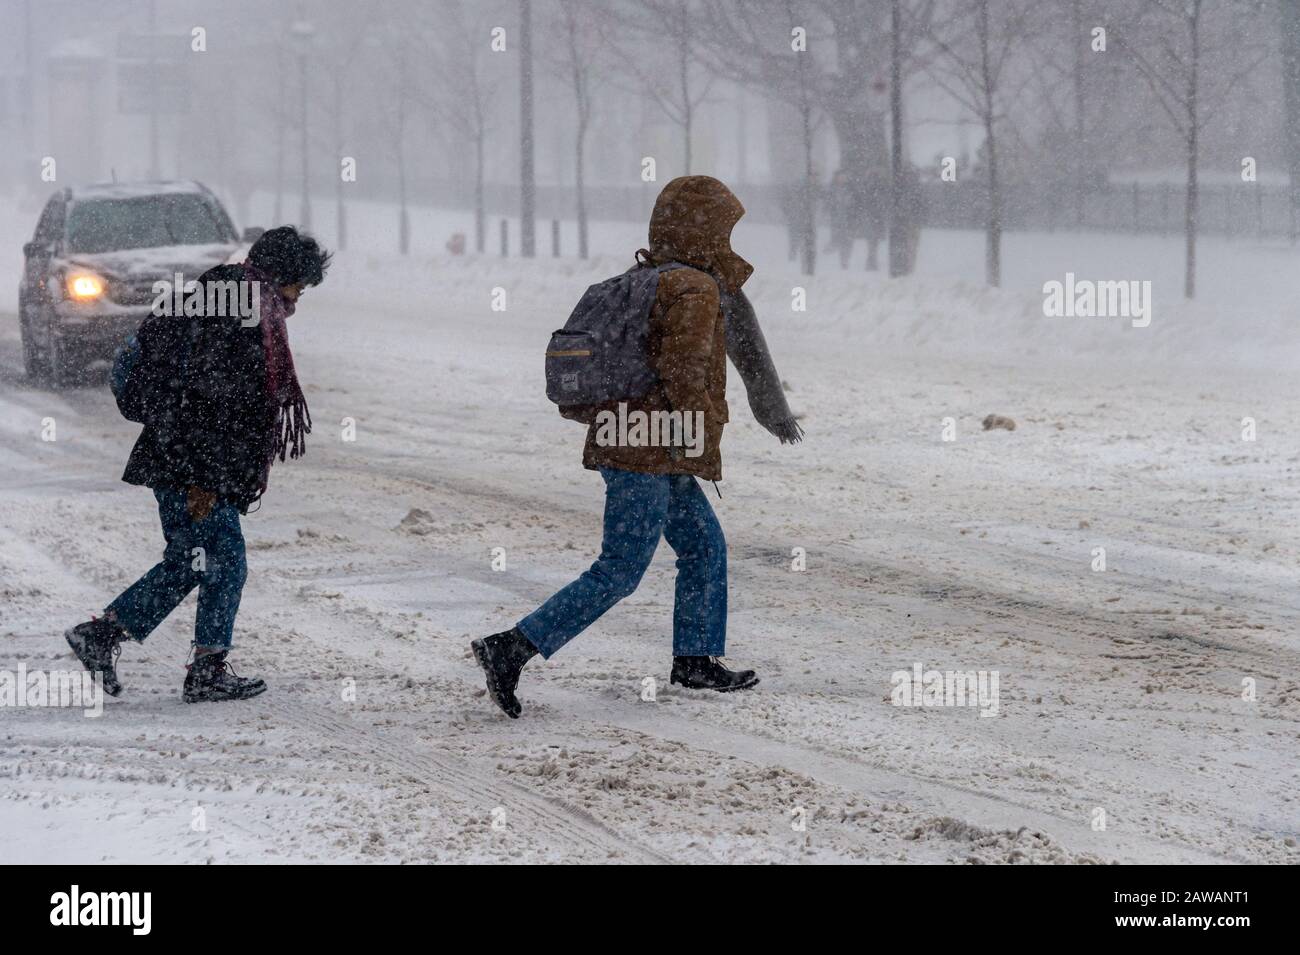 Montreal, CA - 7 February 2020: Pedestrians walking in Downtown Montreal during snow storm. Stock Photo